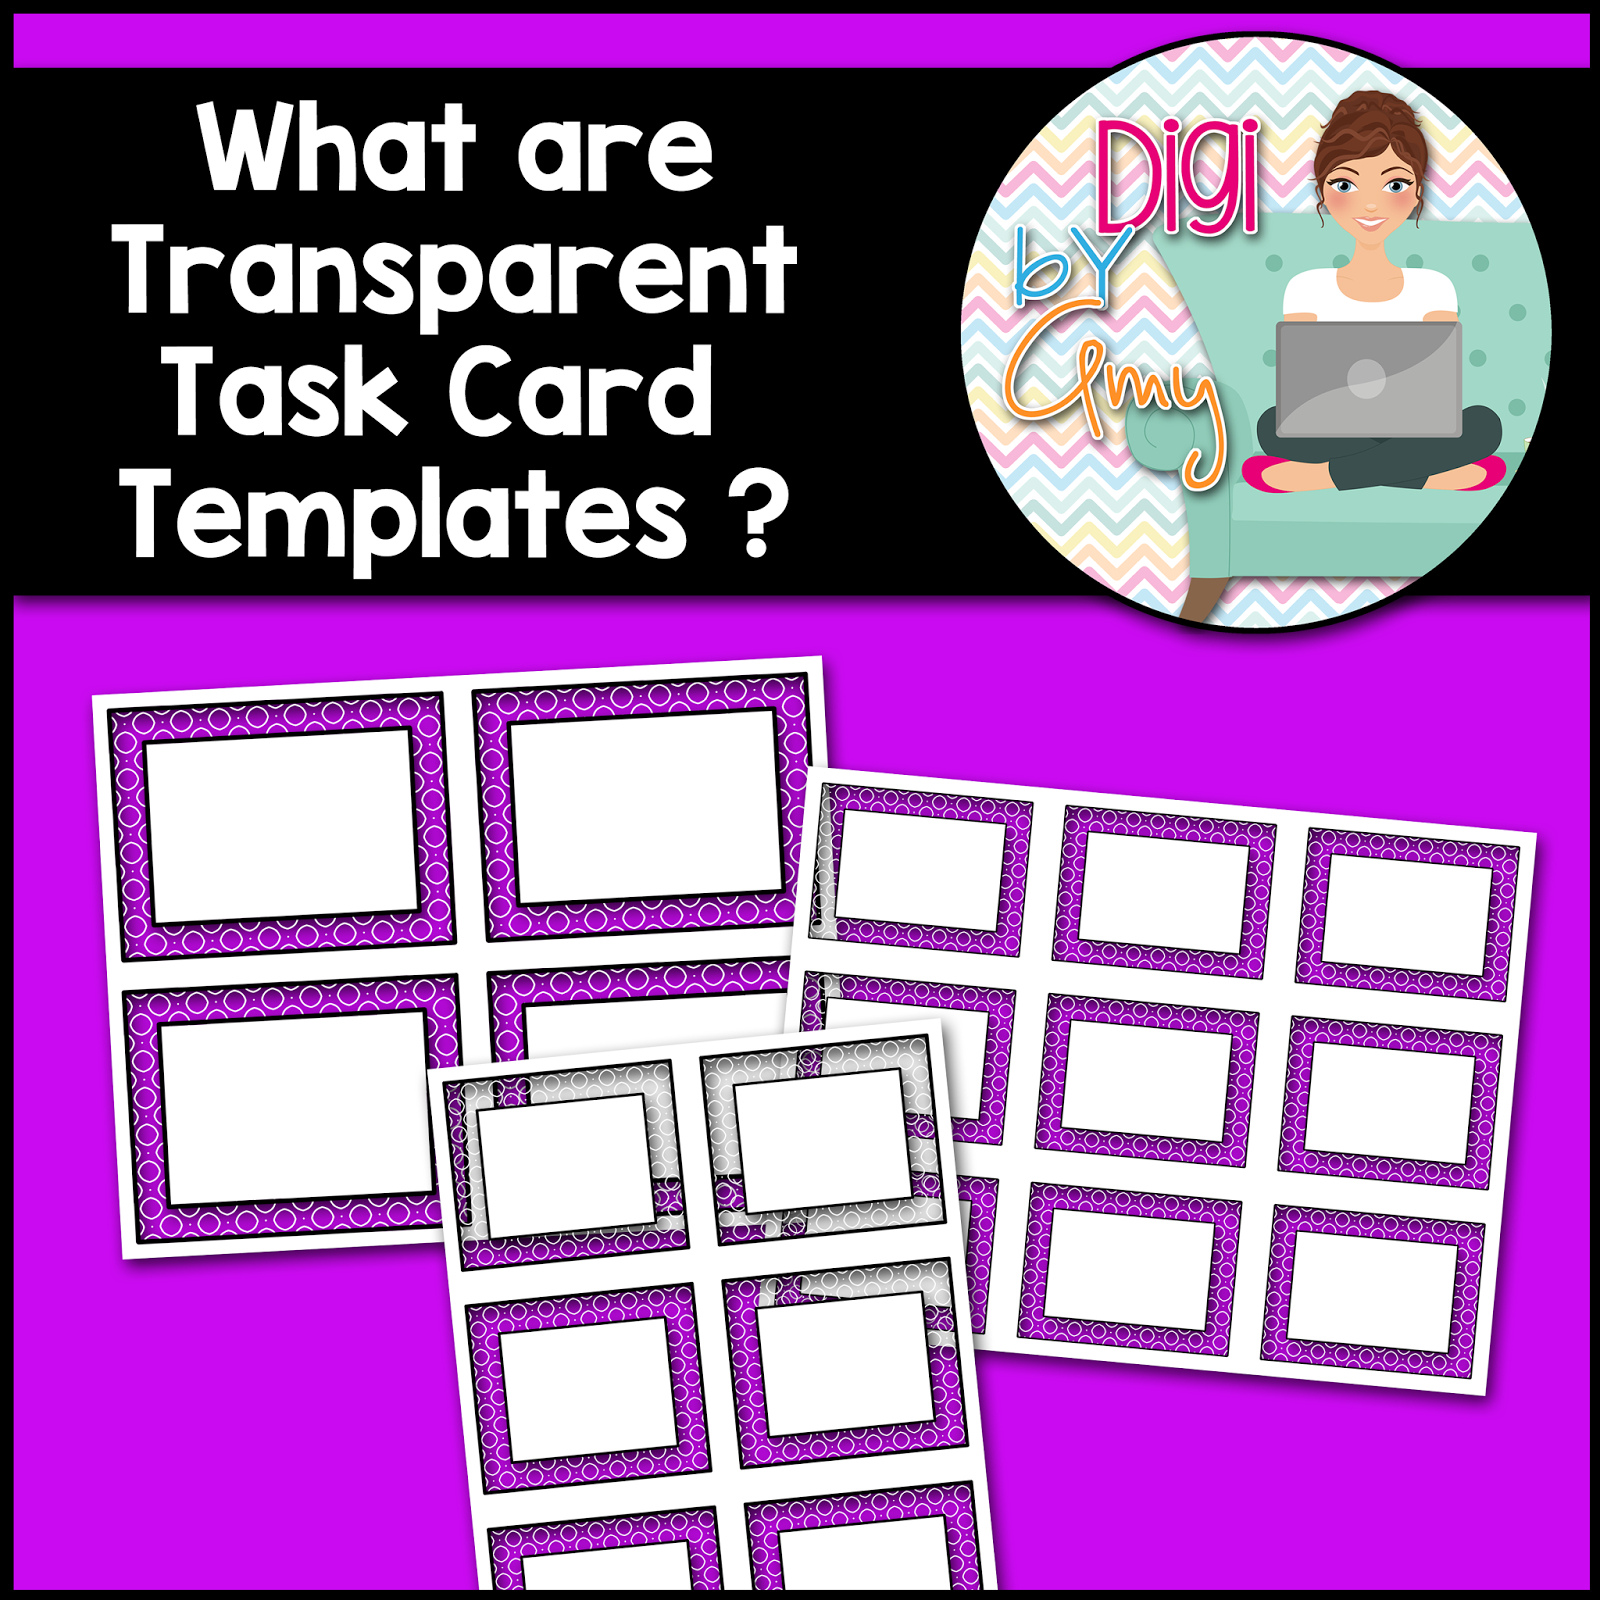 Digiamy: What Are Transparent Task Card Templates? For Task Card Template